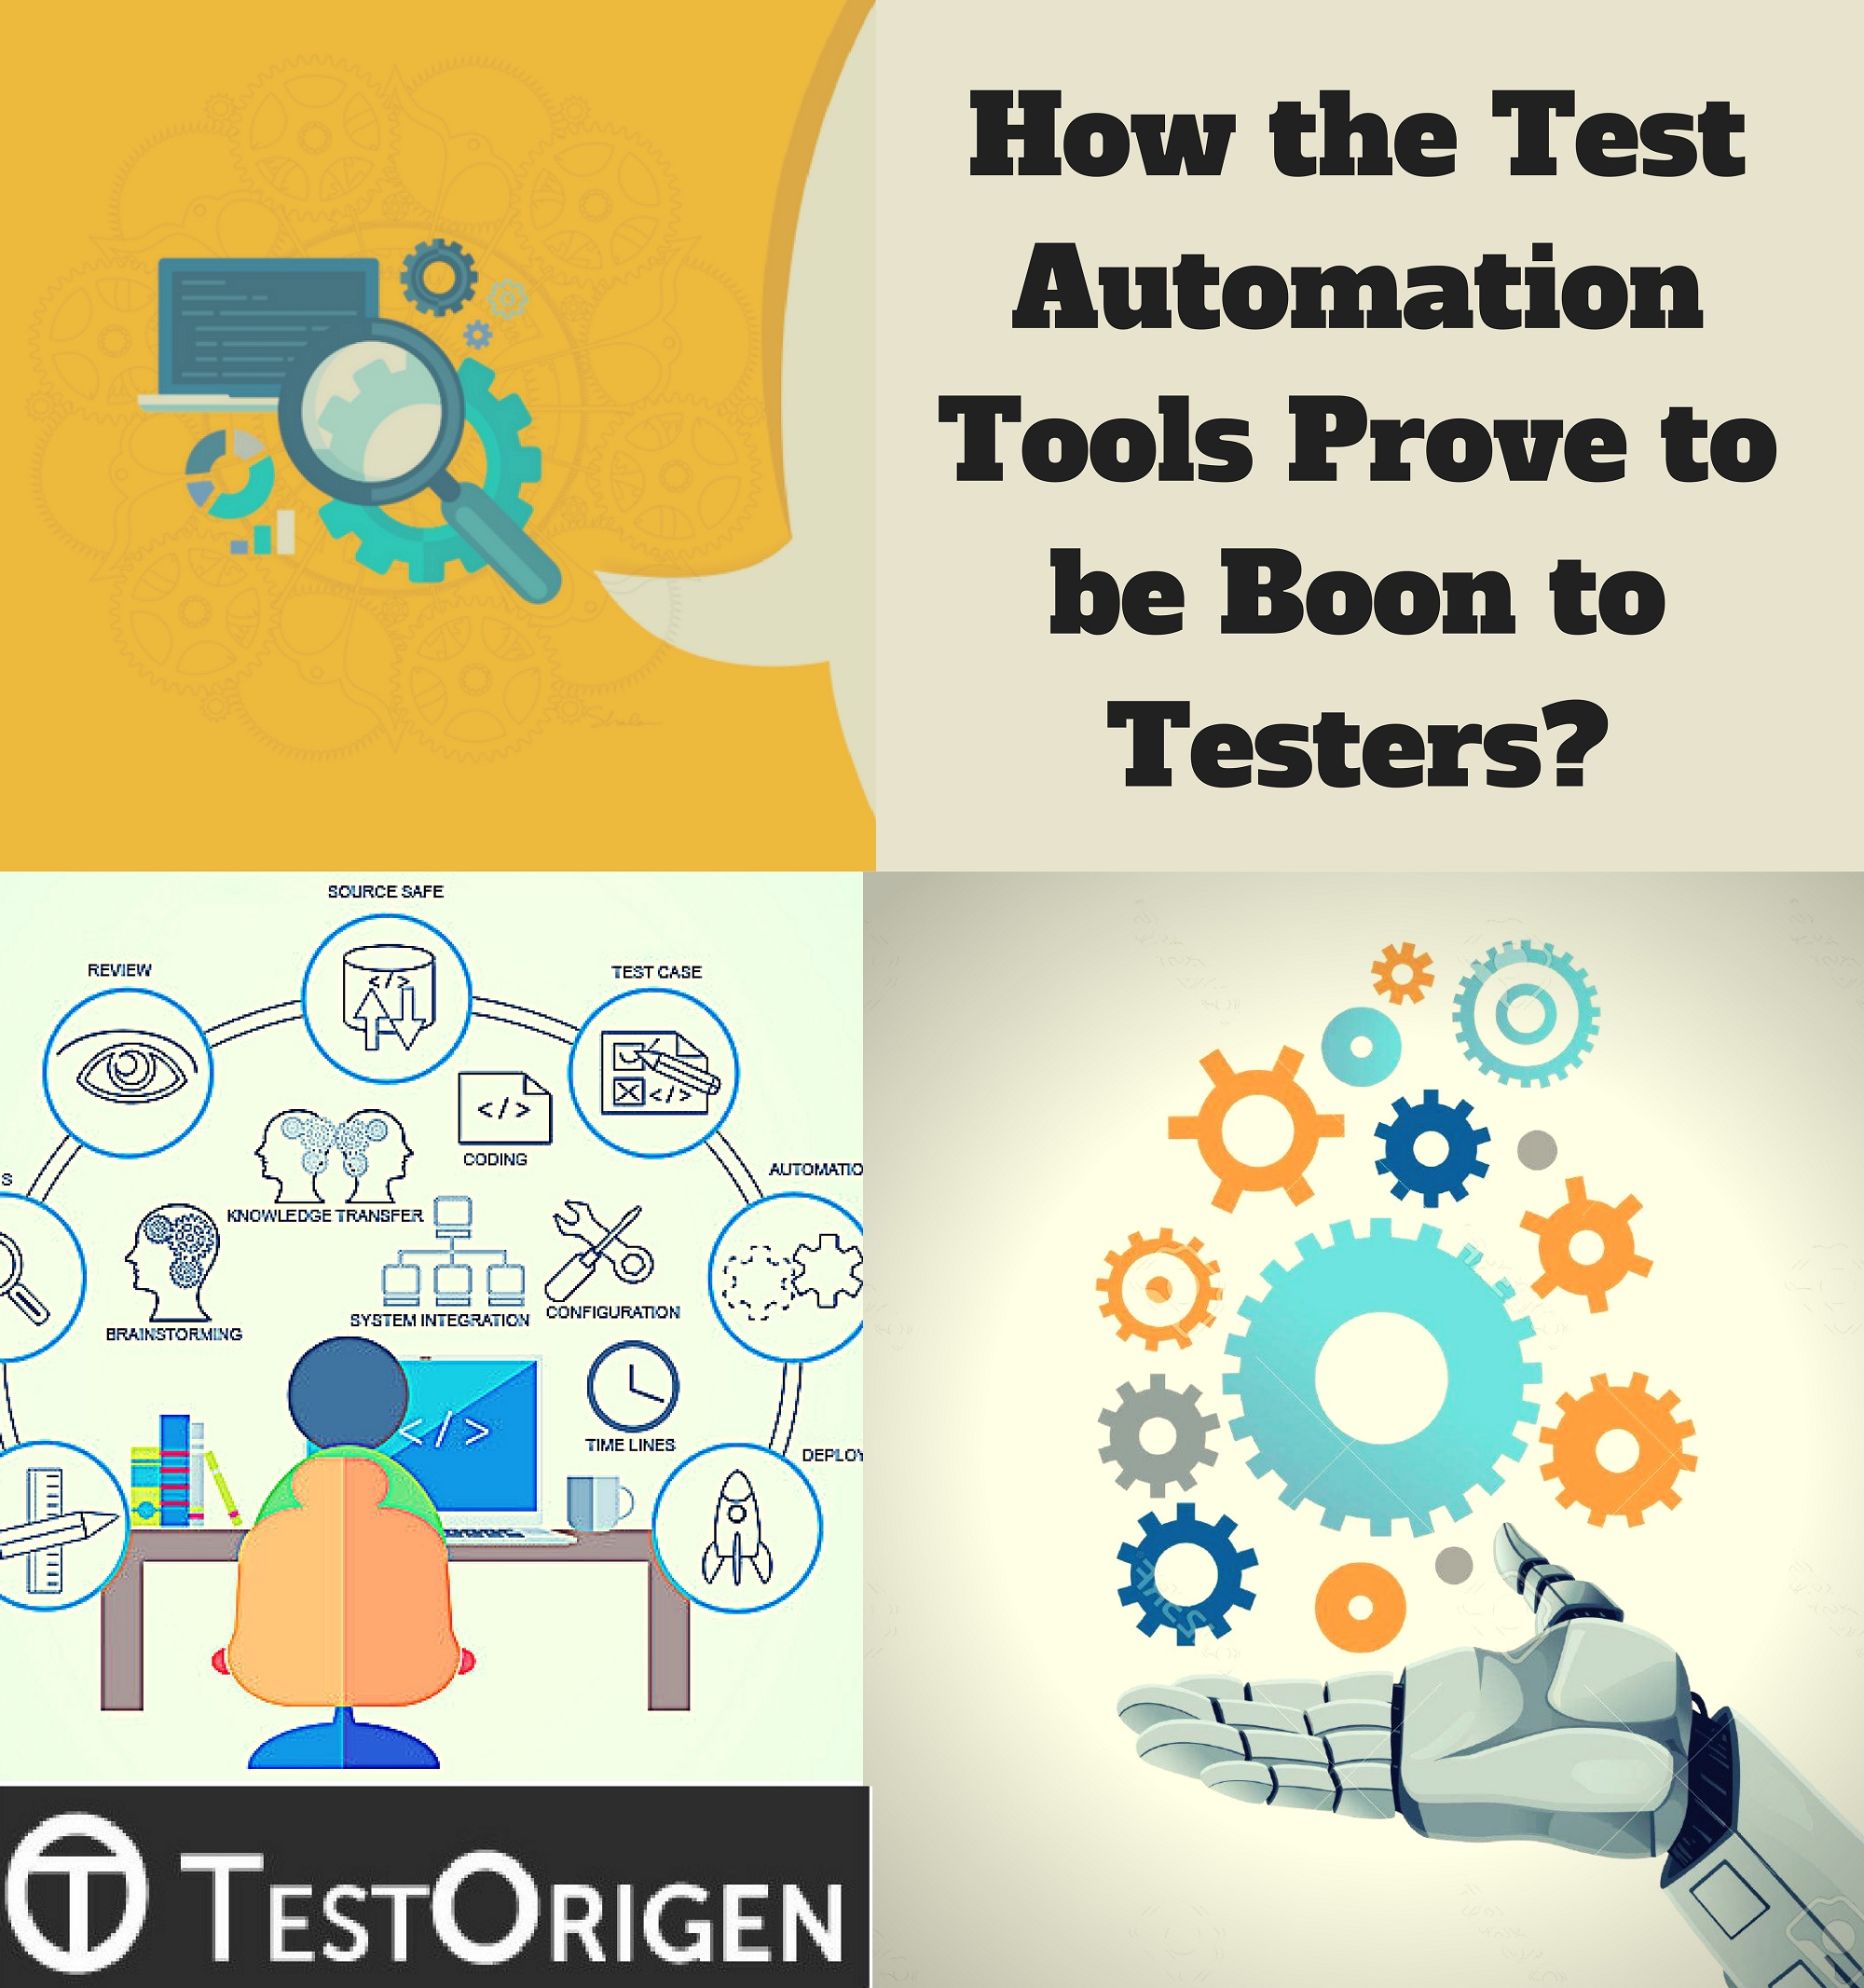 How the Test Automation Tools Prove to be Boon to Testers?